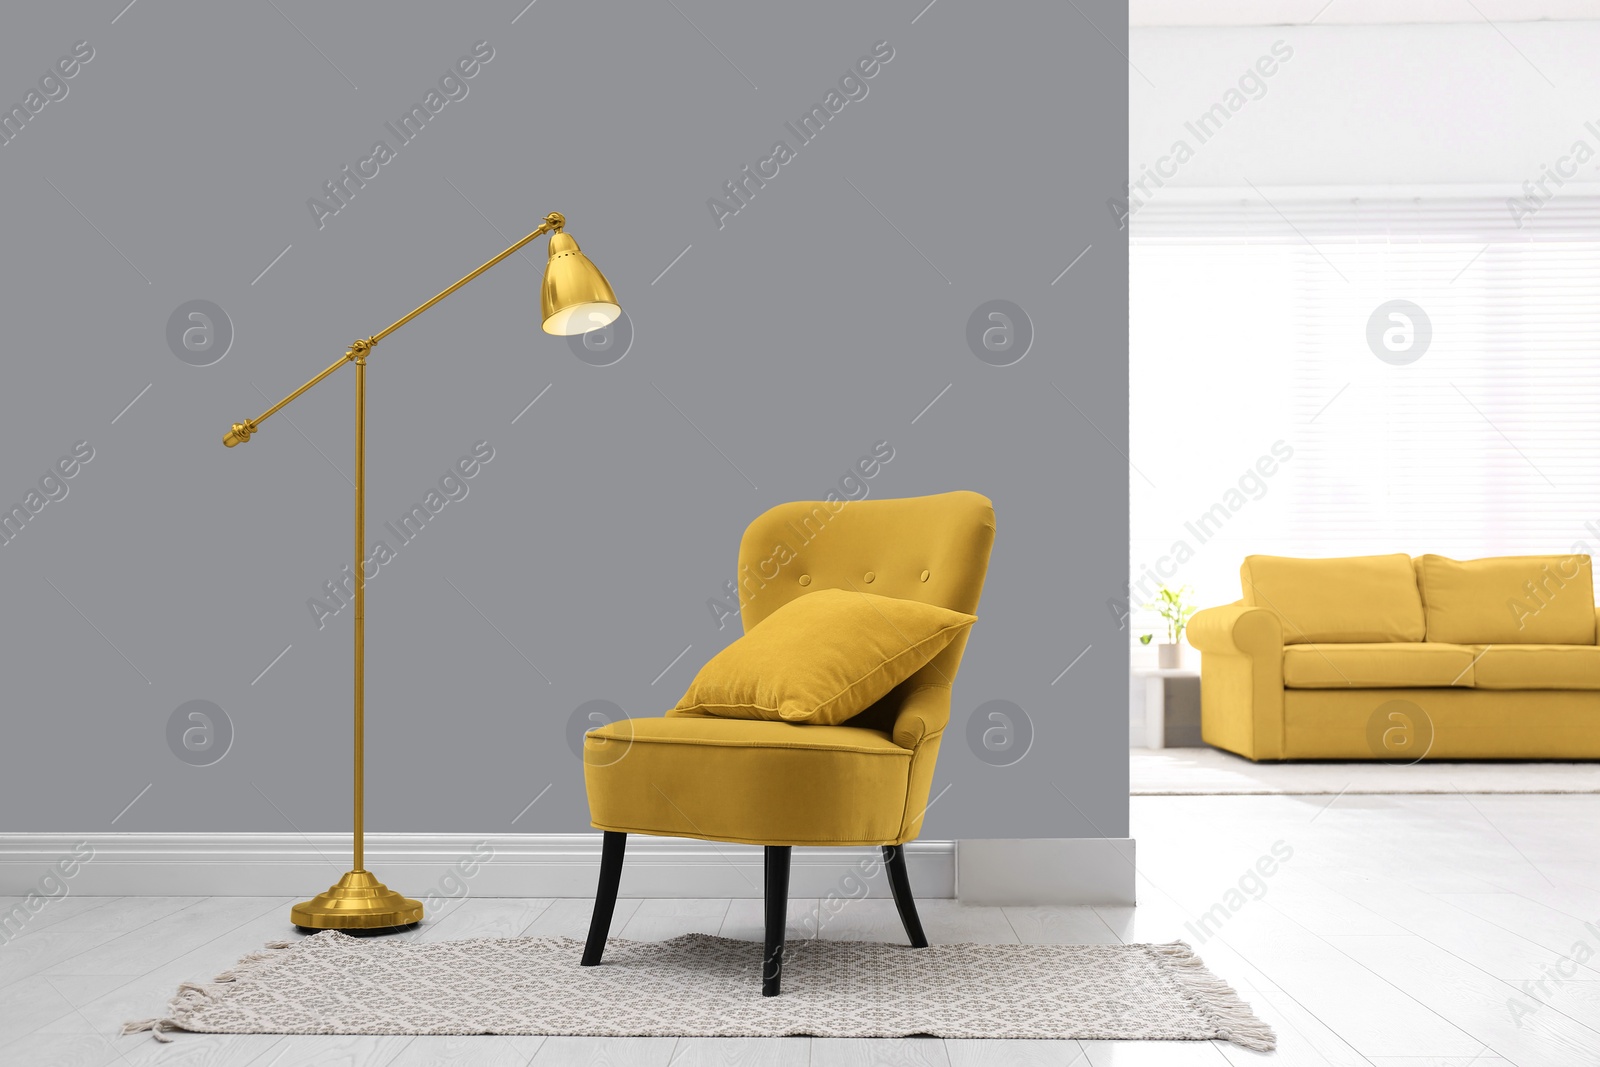 Image of Color of the year 2021. Stylish yellow armchair with cushion, rug and lamp indoors